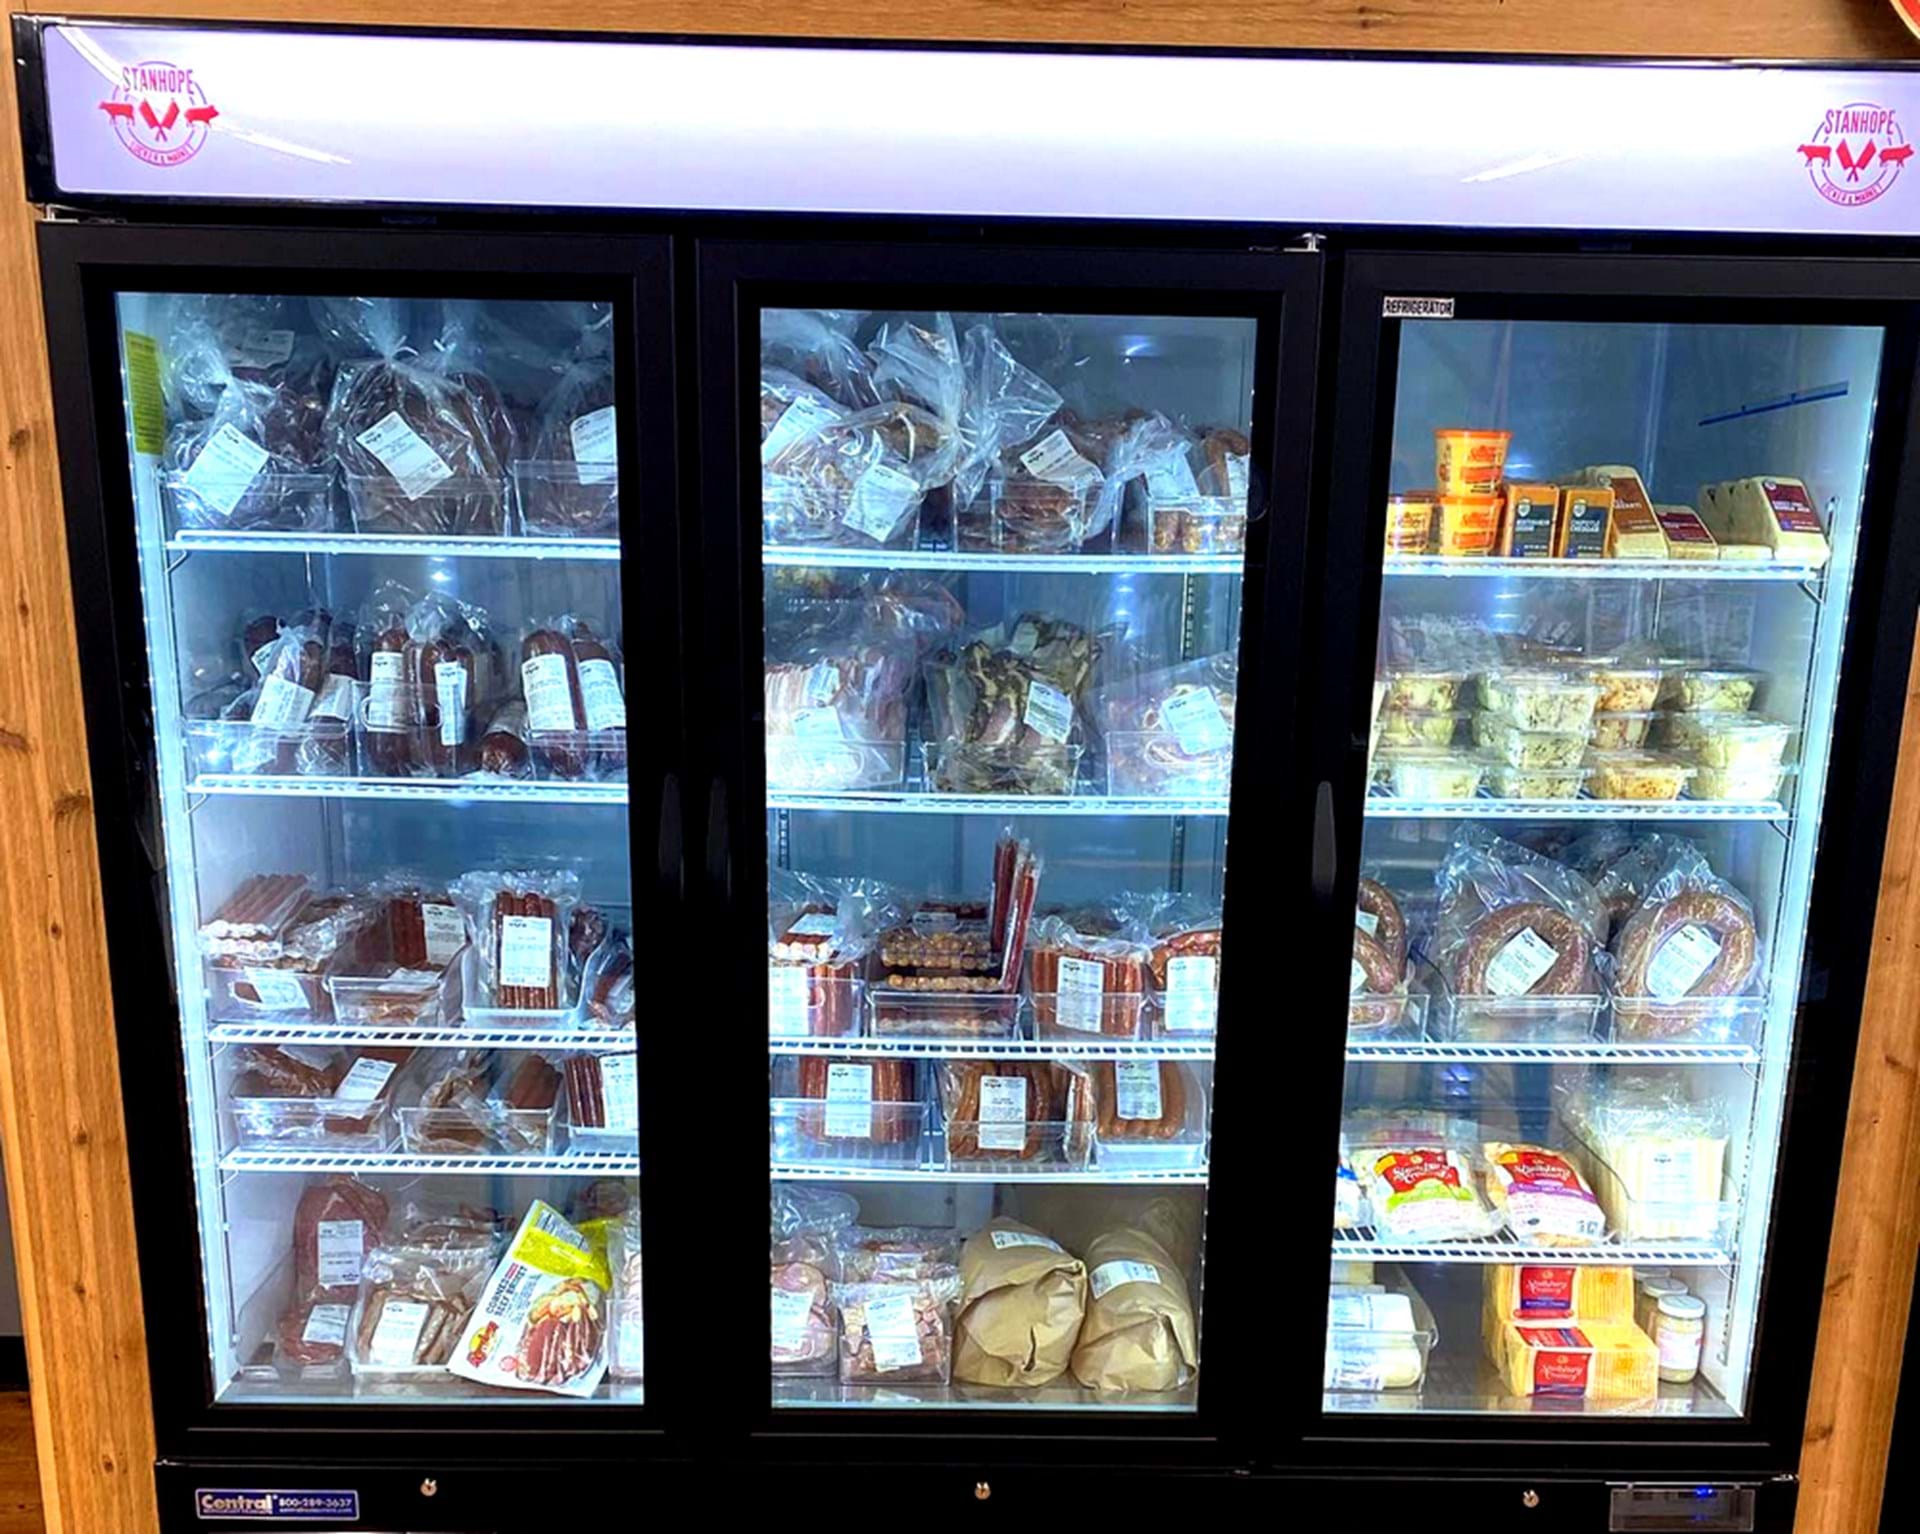 Meat and cheese offerings in the cooler